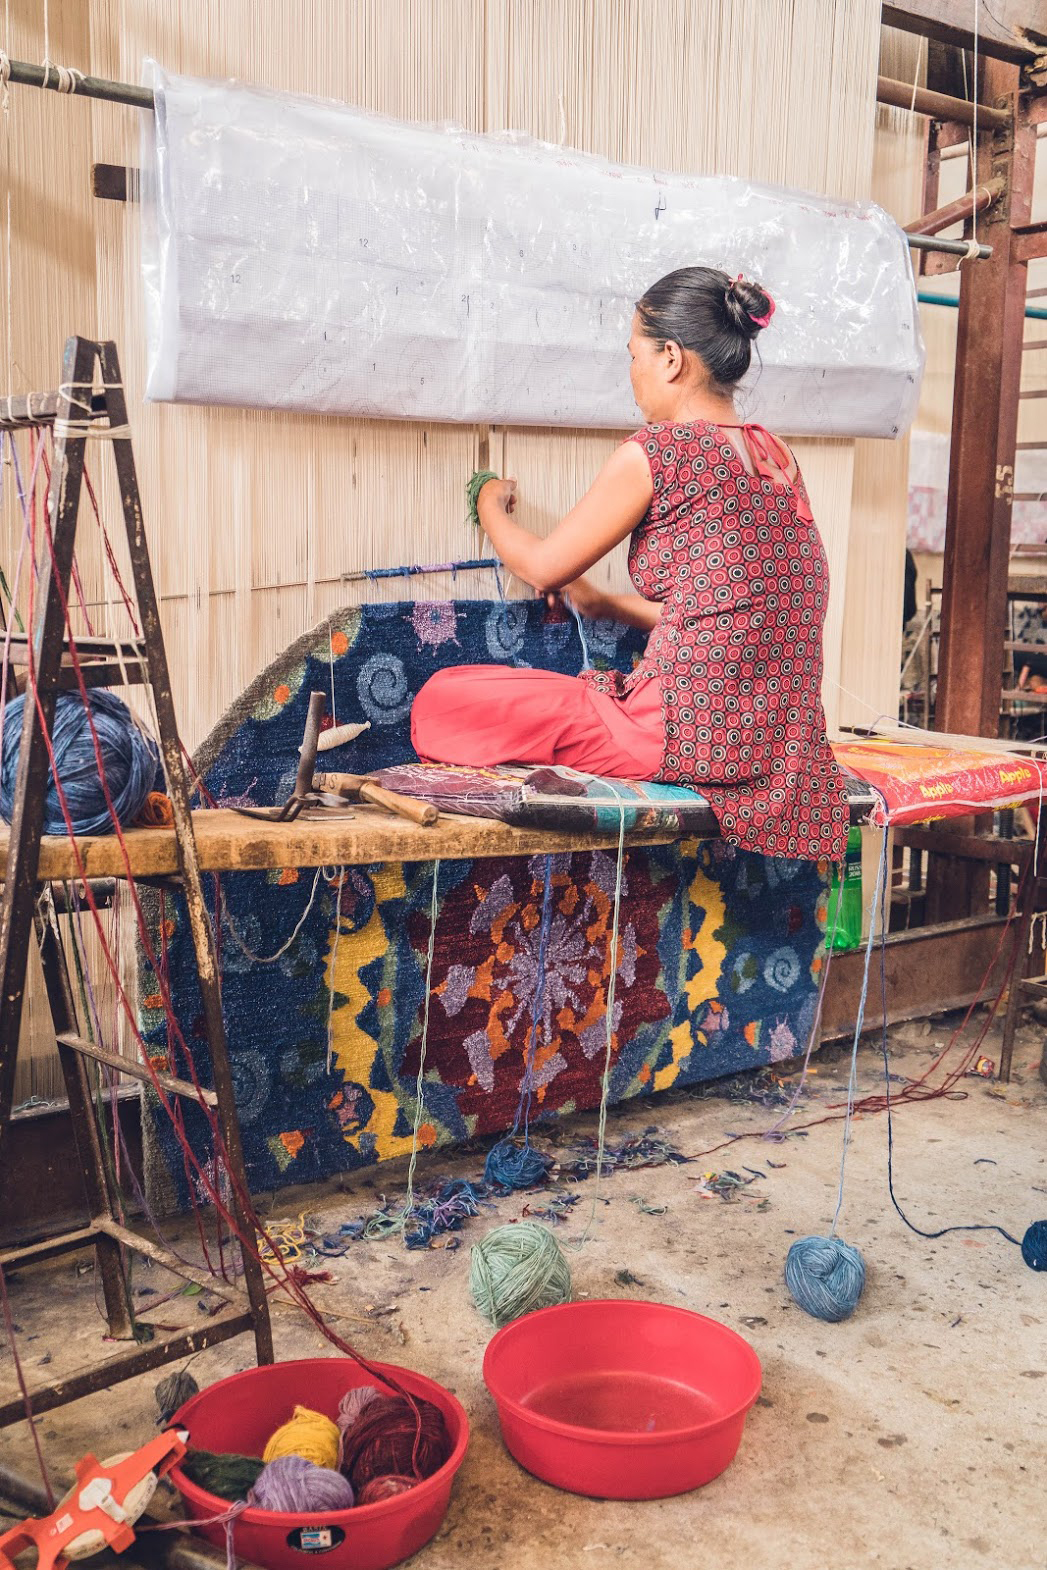 One of the rugs designed as part of the Crossroads and Avenues project launched by Kyle and Kath - Jan Kath Design is shown here on loom in Kathmandu, Nepal. | Image courtesy fo Kyle and Kath.